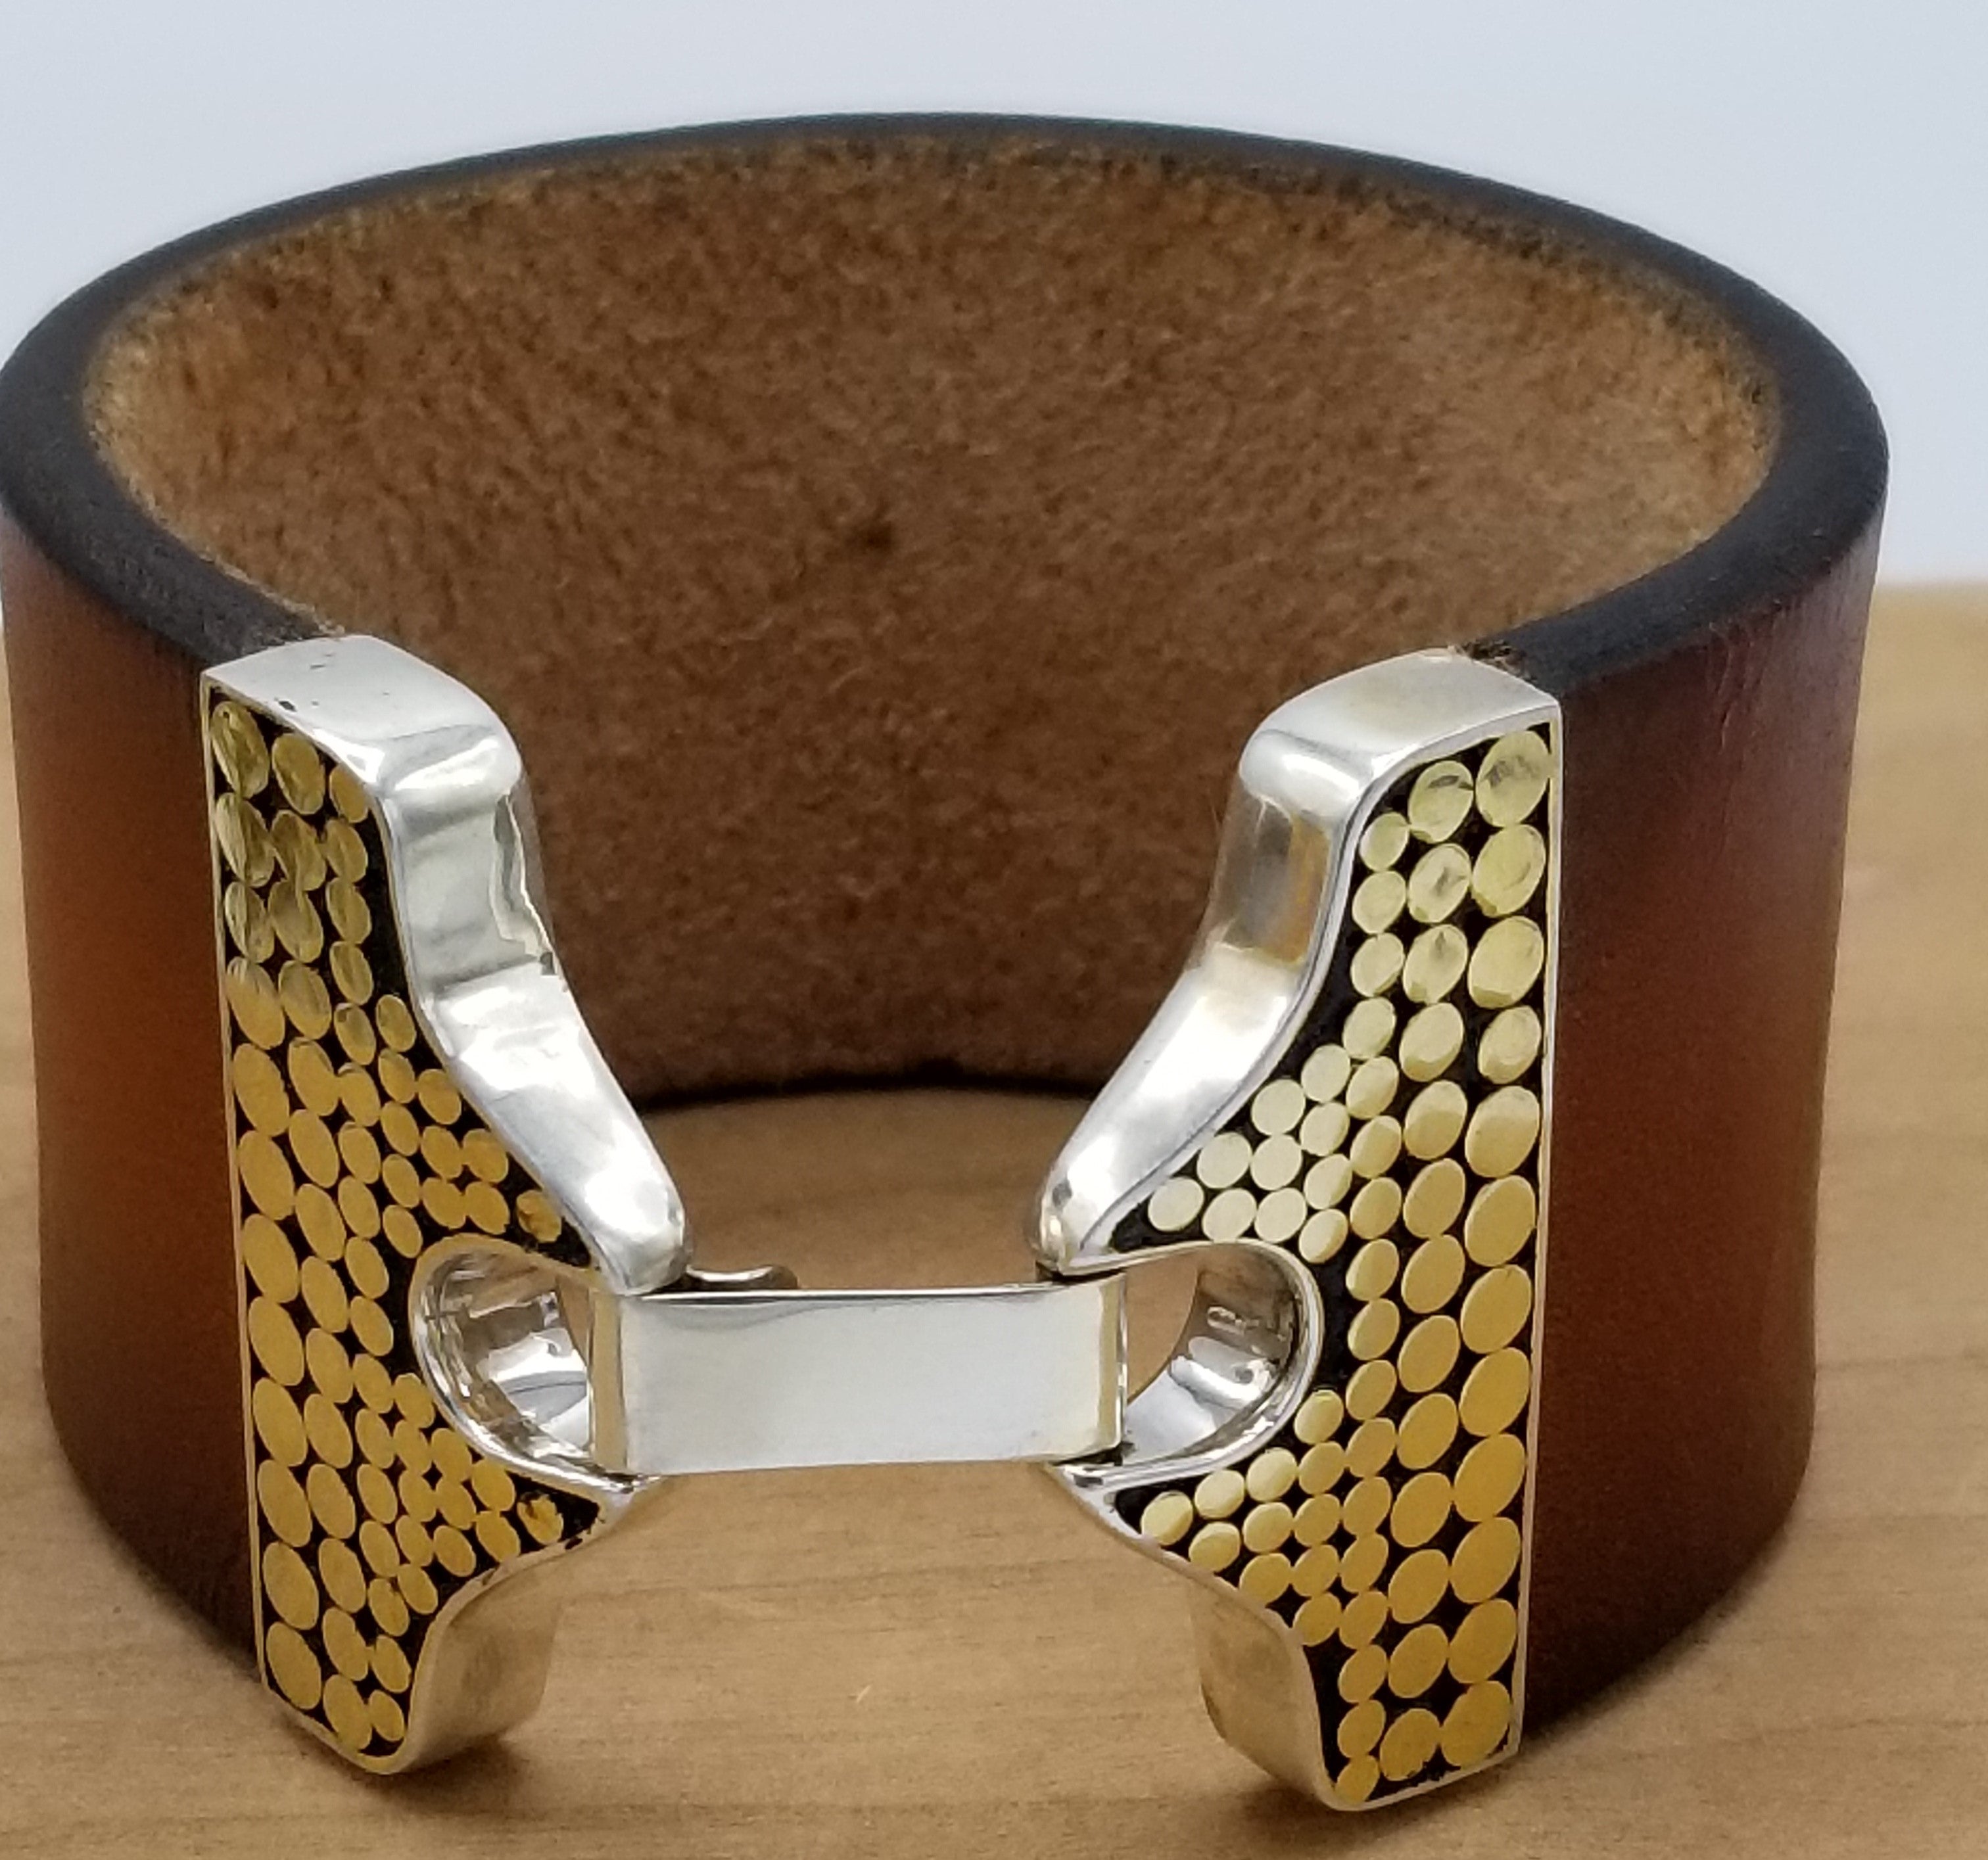 Be A Light Leather Cuff